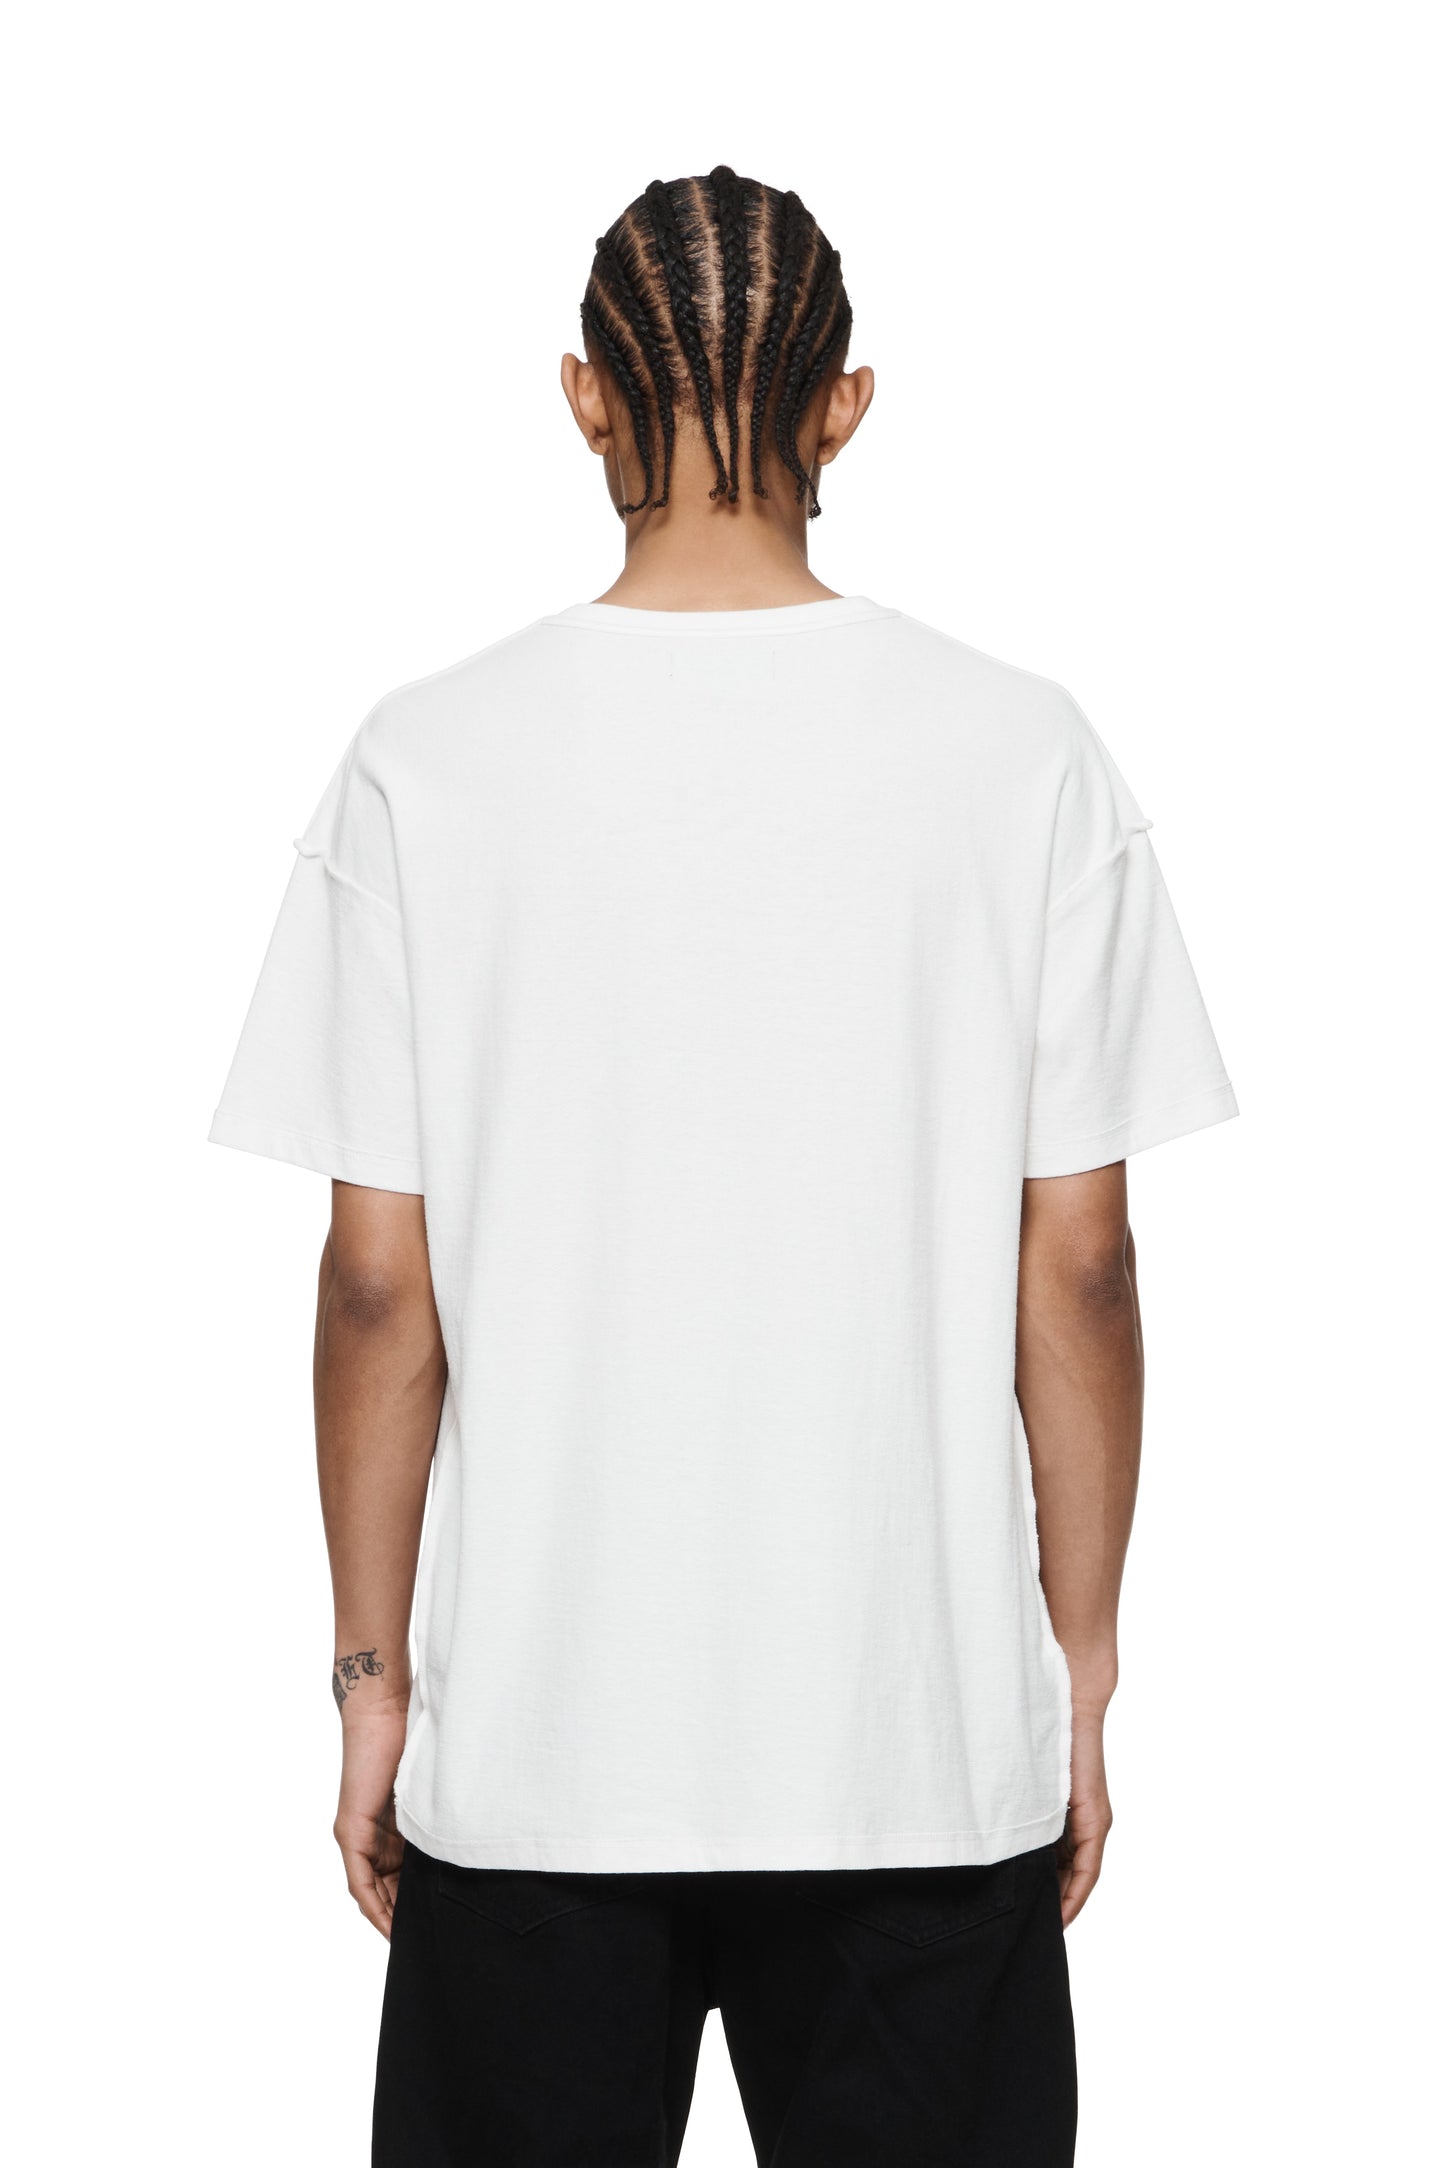 OUTRIDER T-SHIRT - Off White